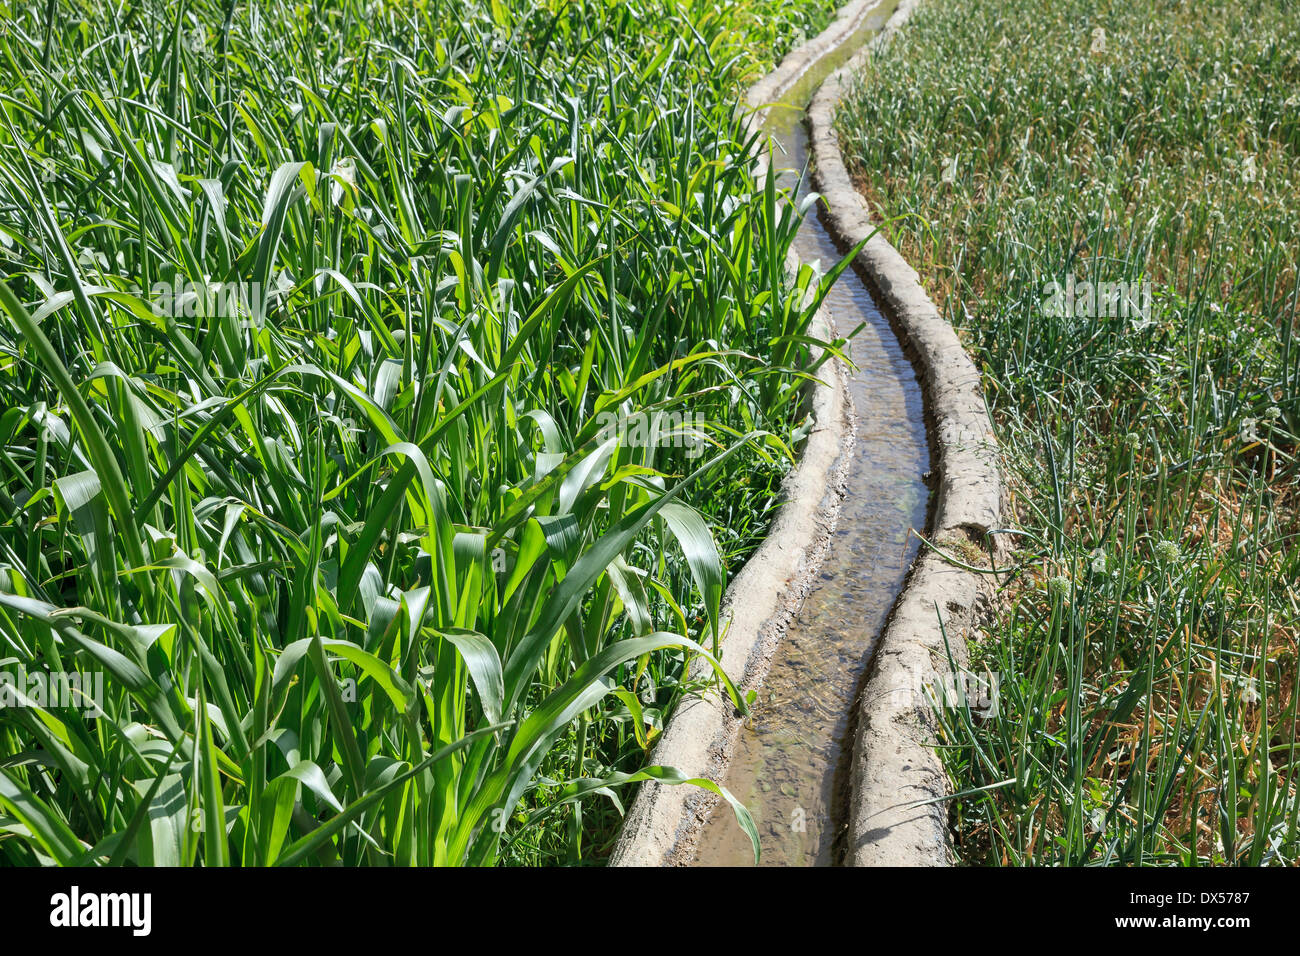 Clear water flowing in a traditional irrigation canal through a green field, Ad Dakhiliyah Governorate, Oman Stock Photo